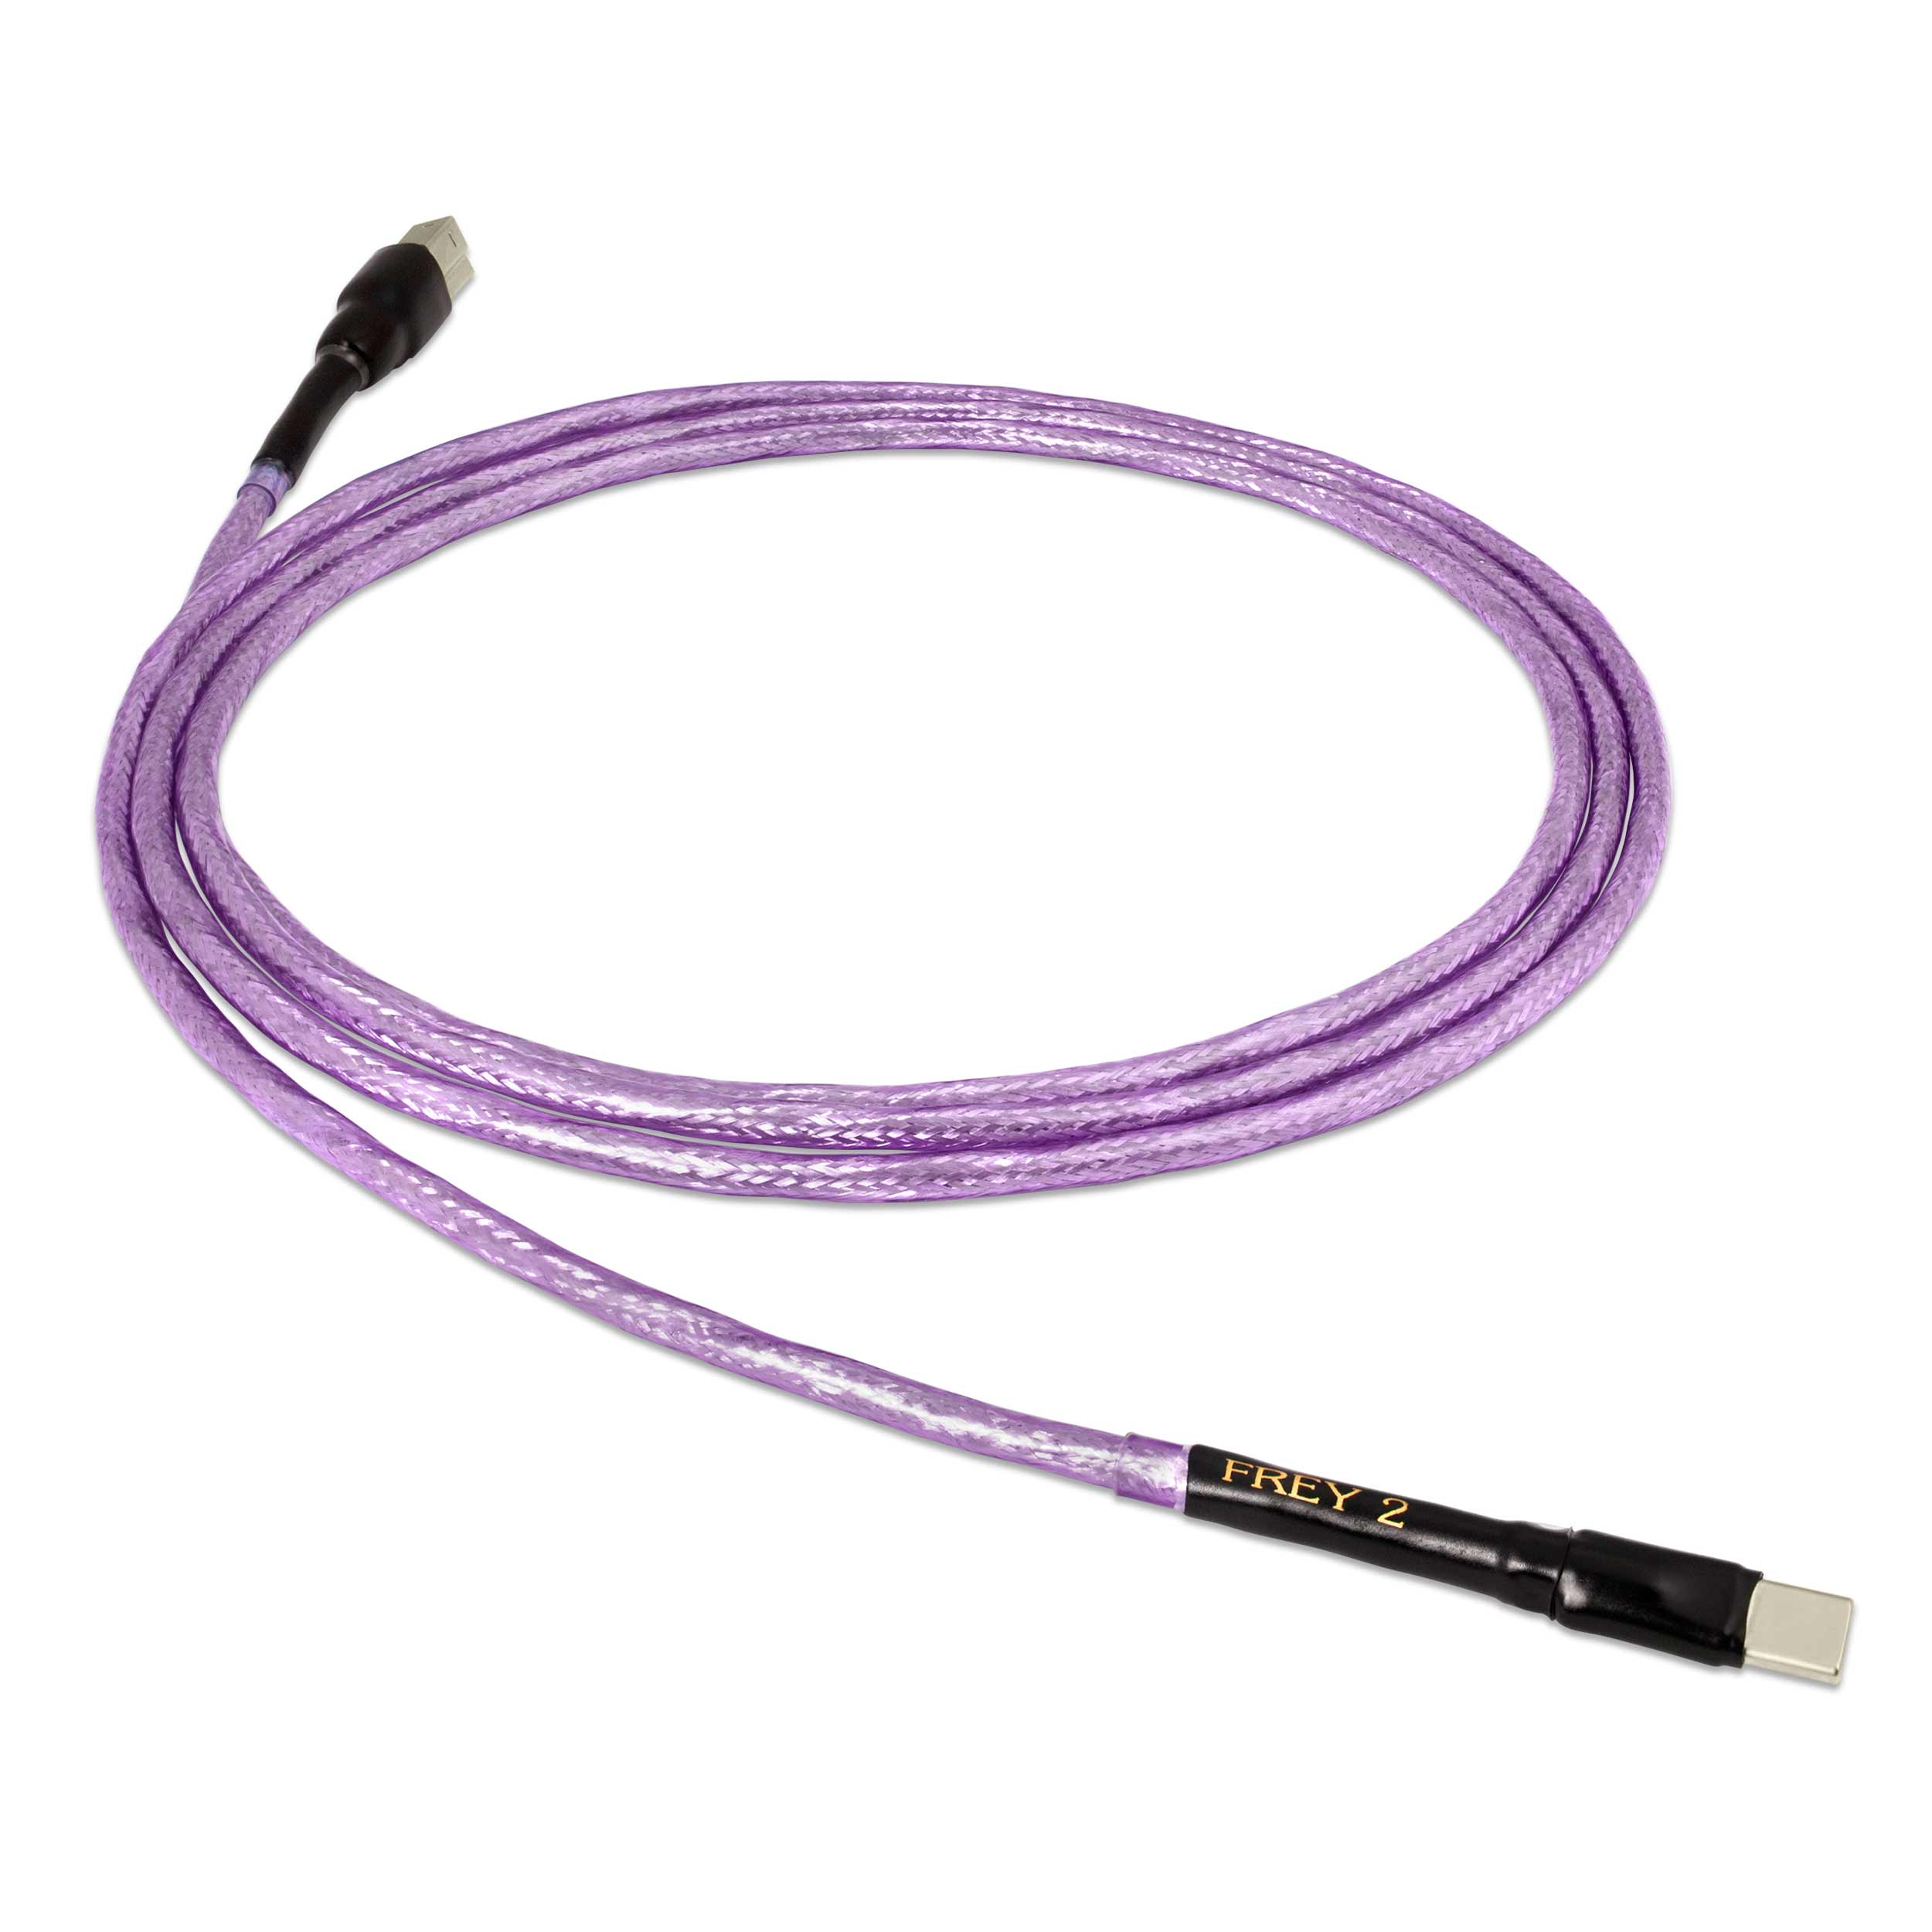 Nordost Norse Frey 2 USB 2.0 Cable